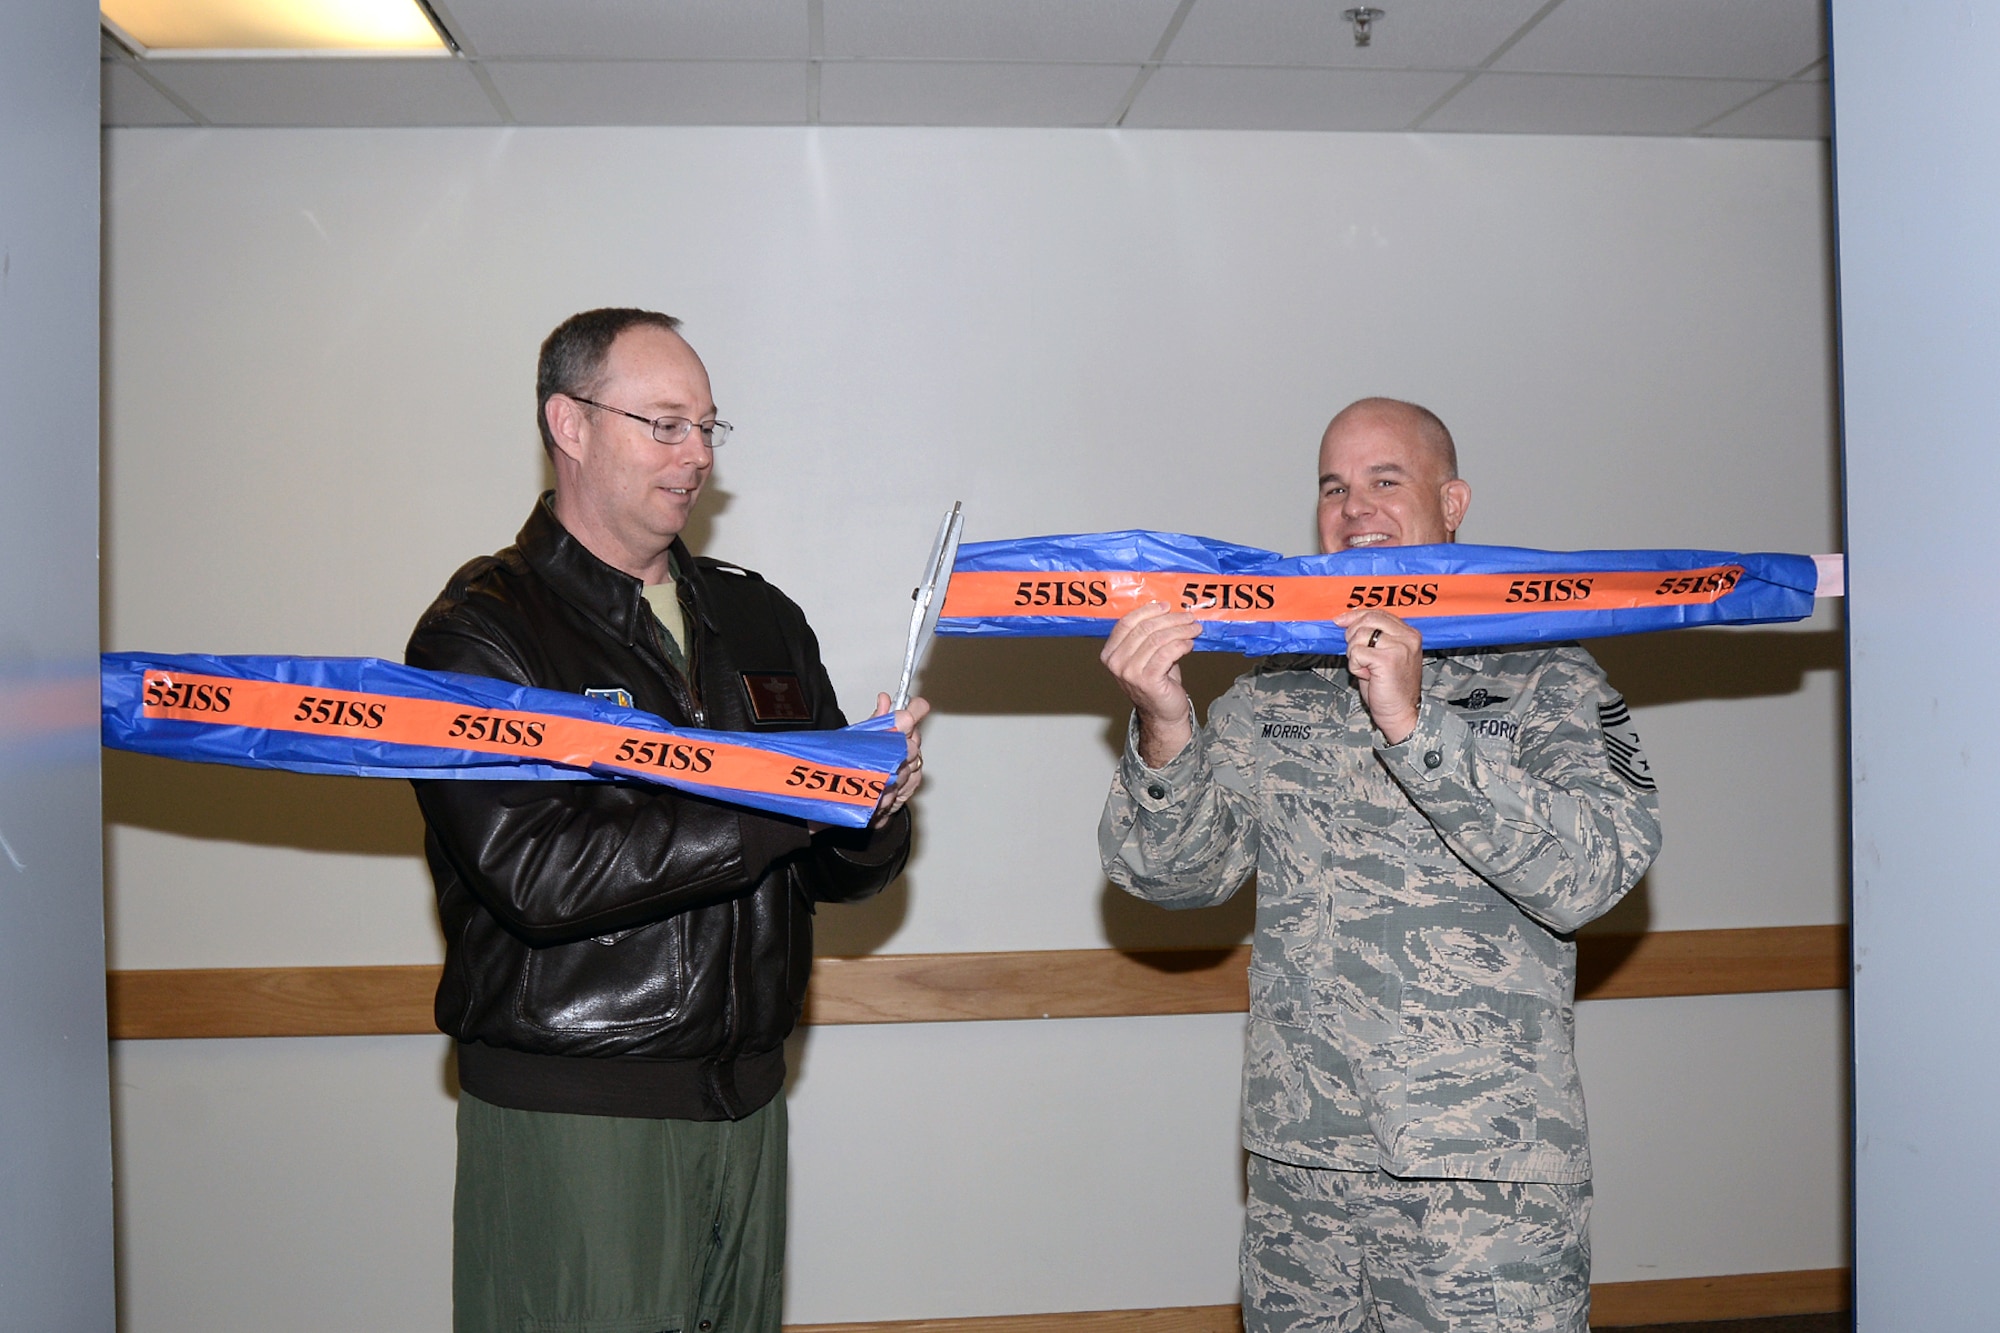 Col. David Berg, 55th Wing vice commander, and Chief Master Sgt. Michael Morris, 55th Wing command chief, cut the ribbon on the 55th Wing Operations Center during a ribbon cutting ceremony at the 55th Intelligence Support Squadron May 1. The WOC is now the central hub for wing-level situational awareness on all of its intelligence, surveillance and reconnaissance assets, as well as its electronic warfare assets, supporting combatant commanders around the world on a daily basis. (U.S. Air Force photo by Kendra Williams)